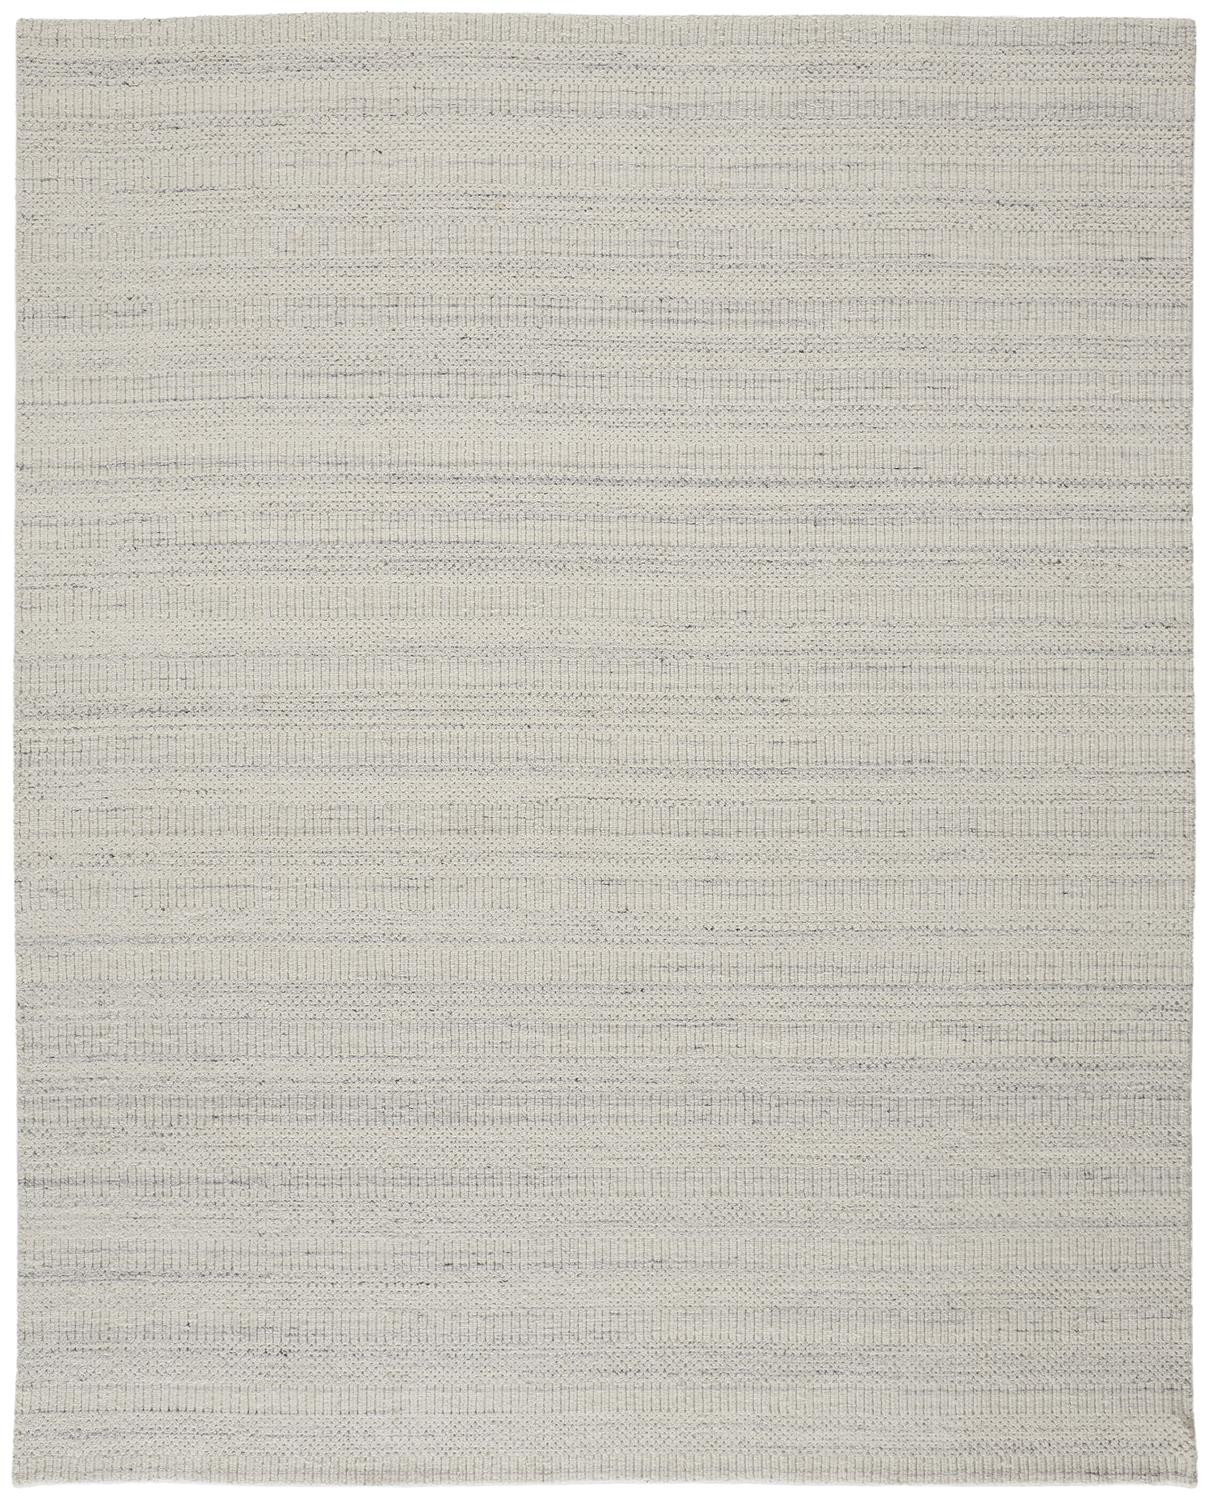 2' X 3' Ivory And Gray Wool Hand Woven Stain Resistant Area Rug-514061-1